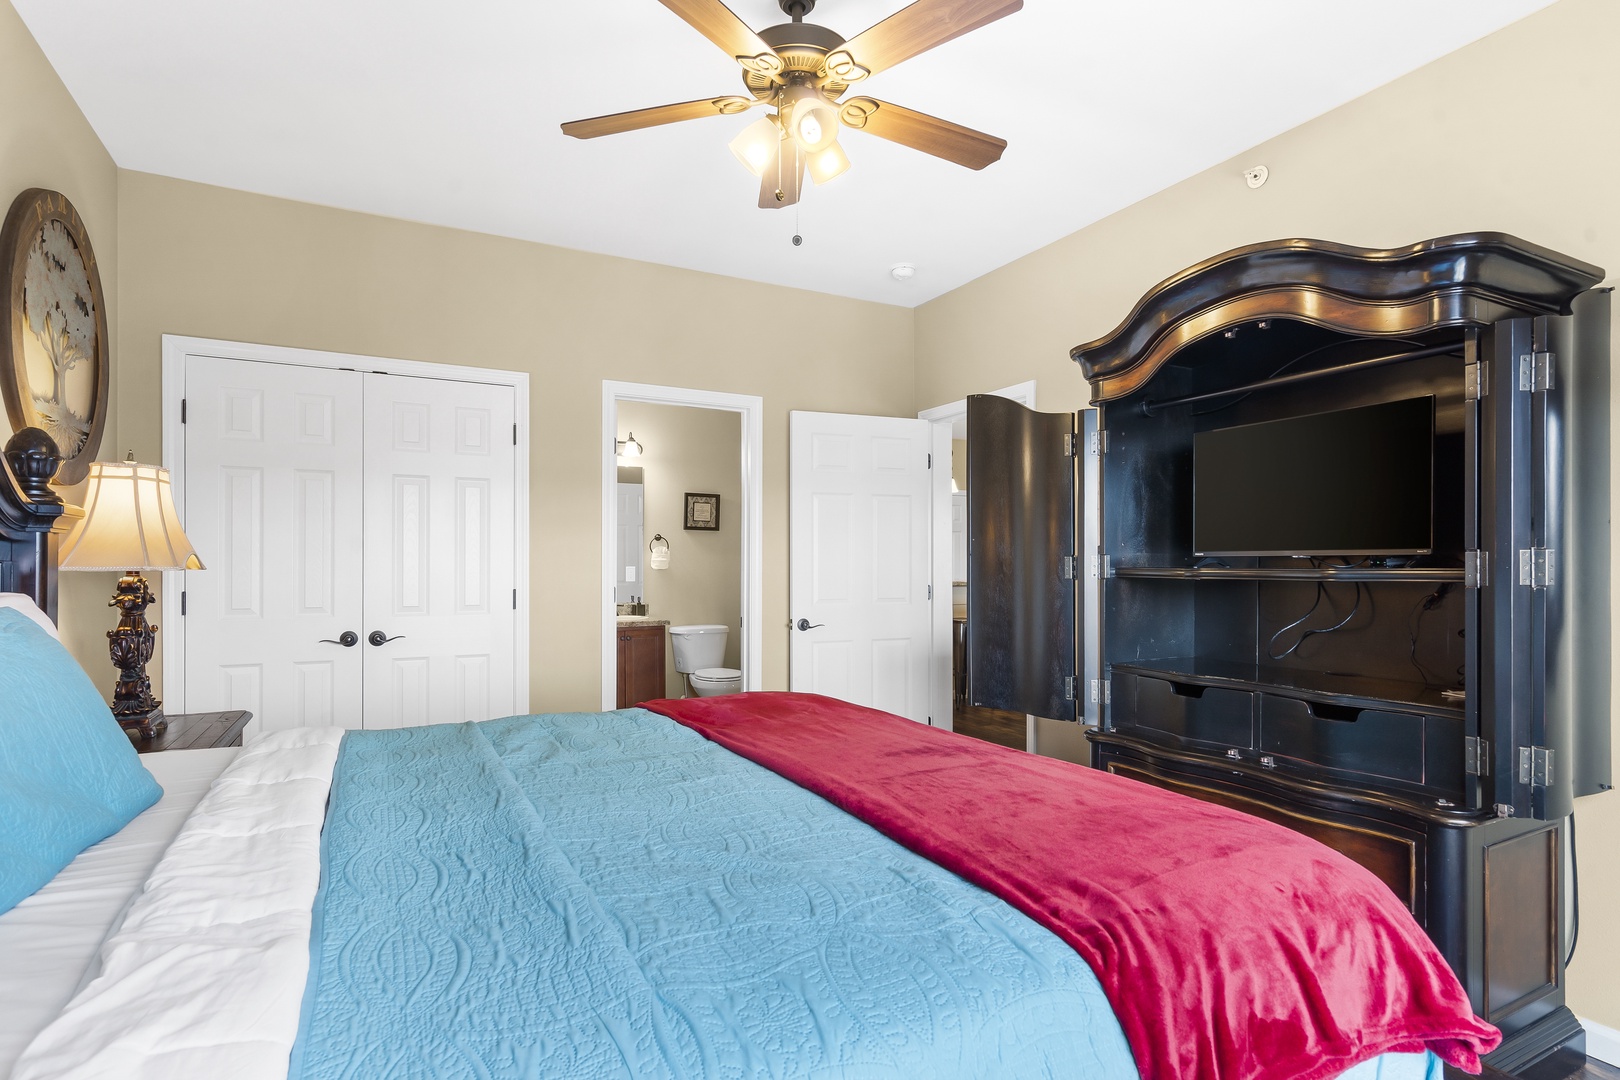 The master suite showcases a regal king bed, private ensuite, & TV